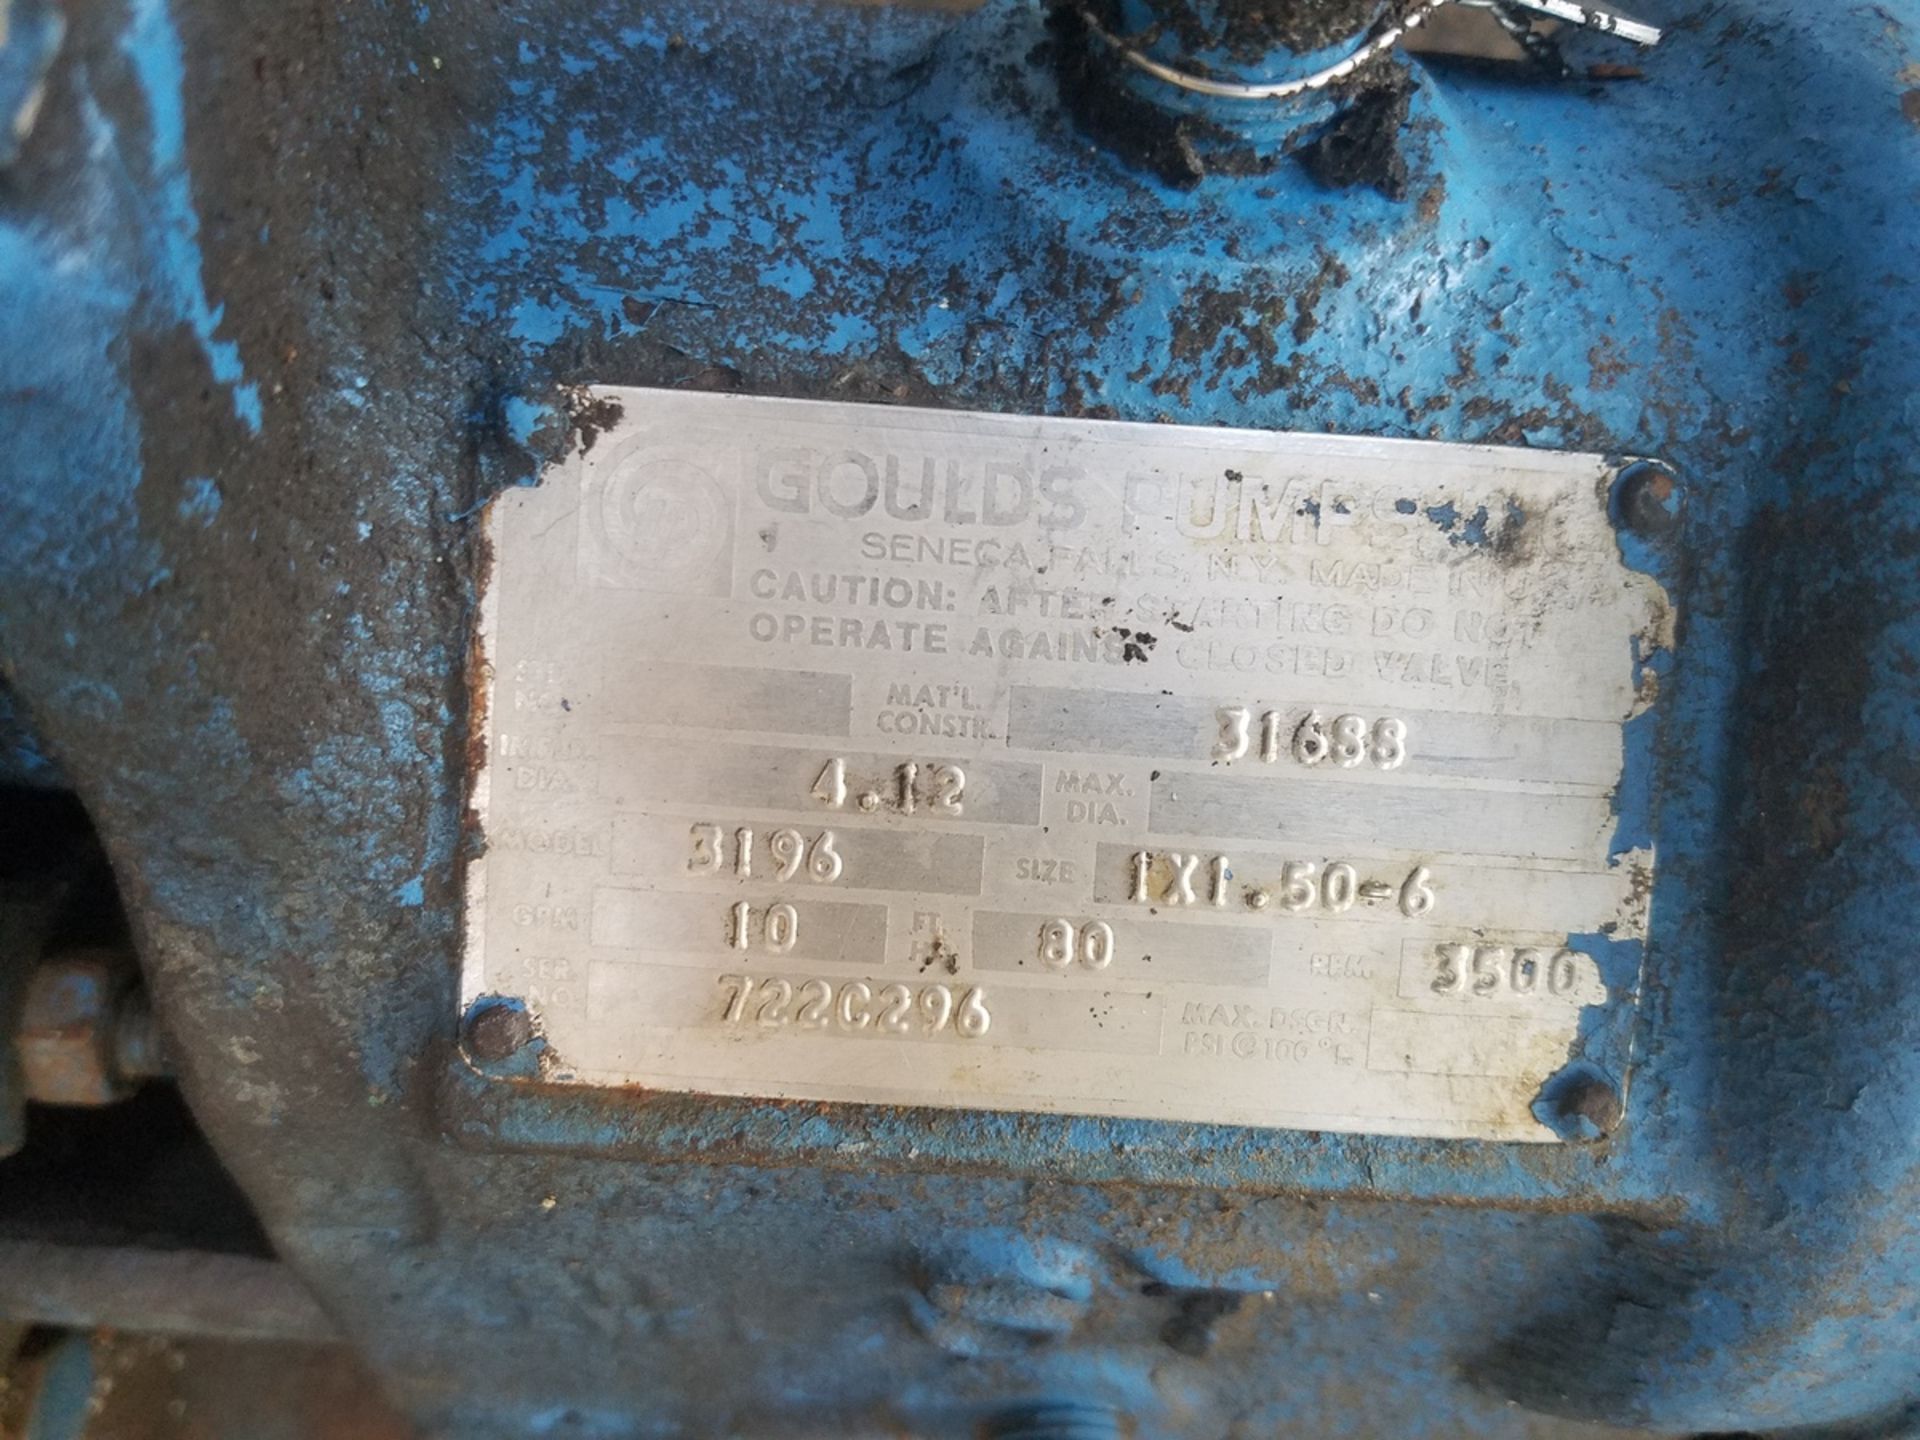 Goulds 1X1.5-6 Centrifugal Pump, W/ 10 HP Electric Motor | Rig Fee: $200 - Image 2 of 3